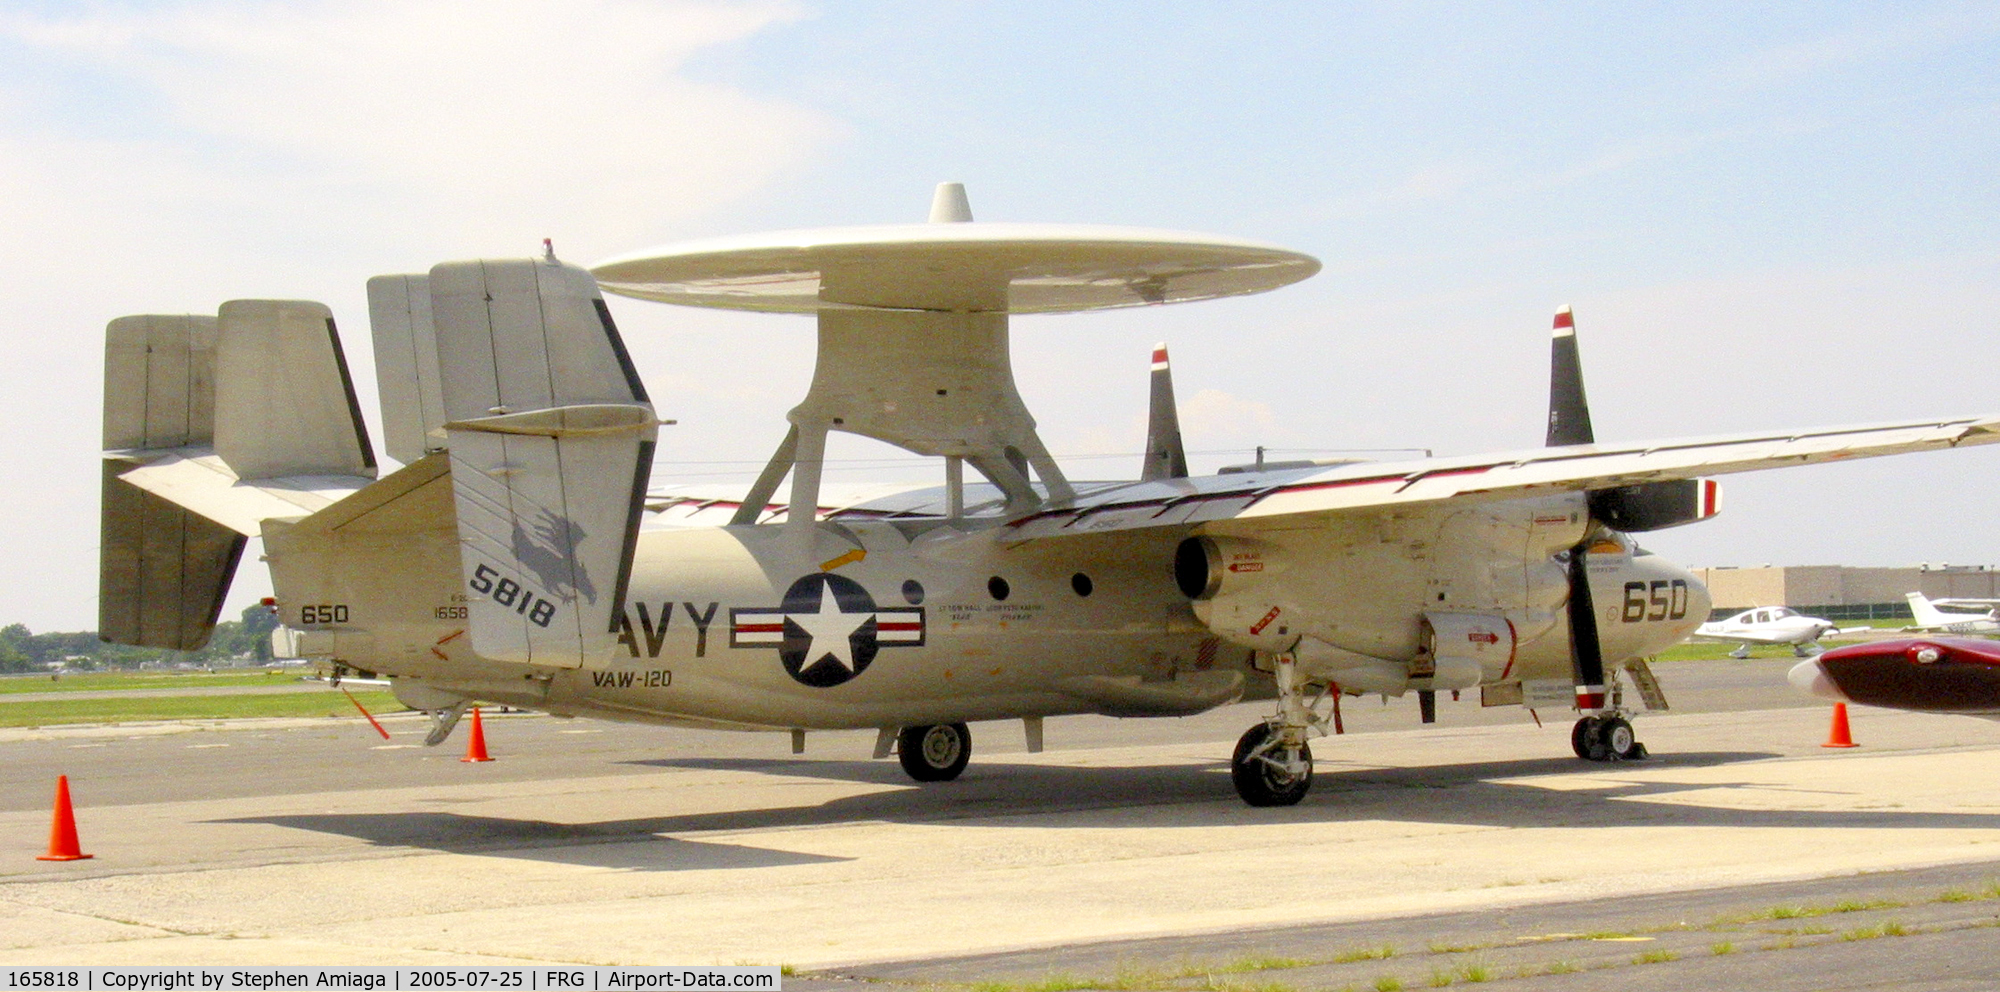 165818, 2000 Northrop Grumman E-2C Hawkeye C/N A189, E-2C from VAW-120 visits Republic with the S-3.